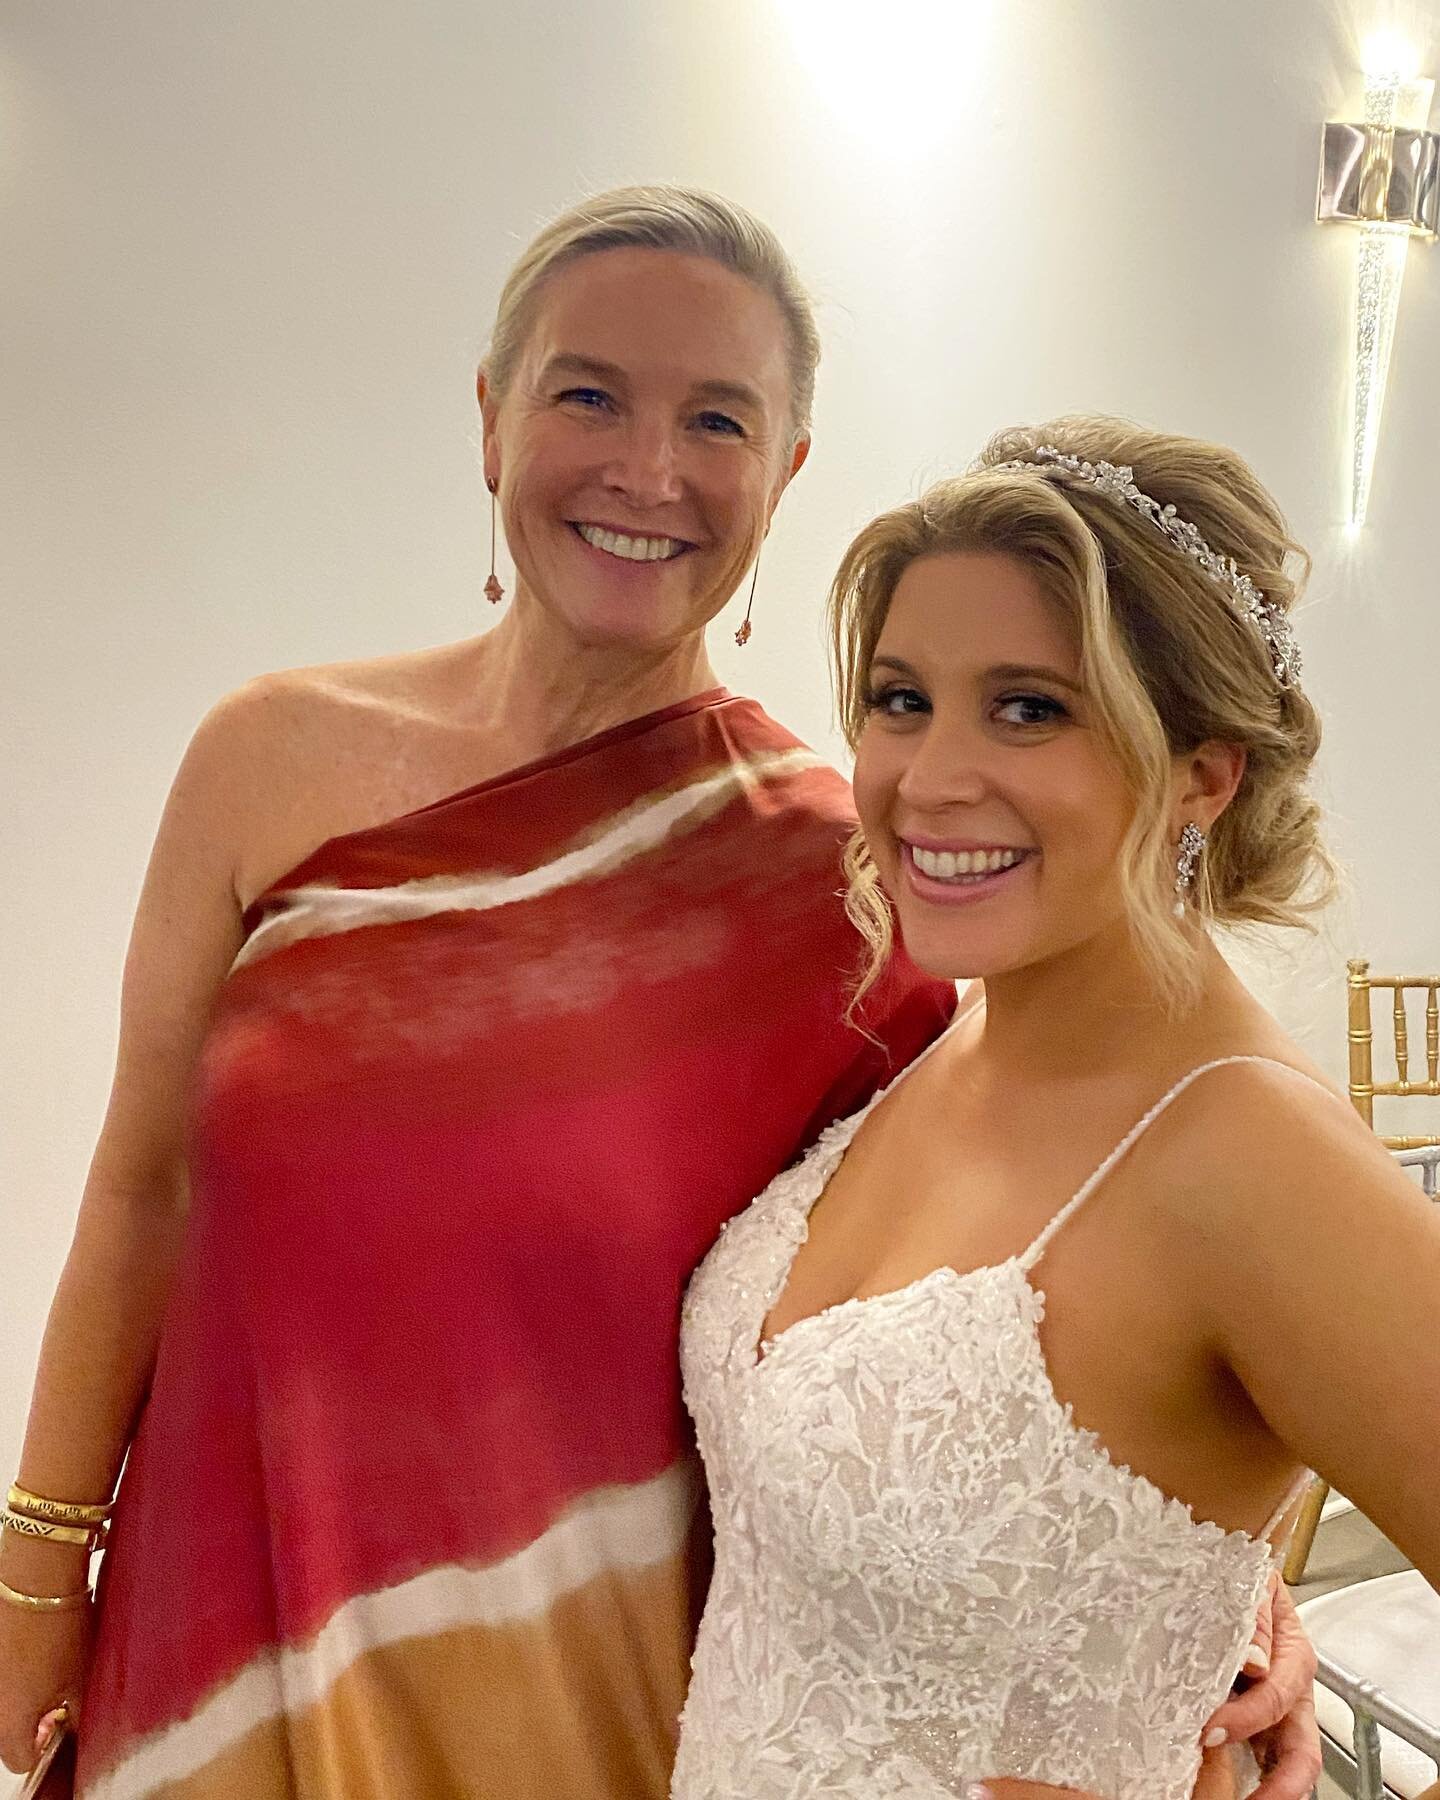 Congratulations to our beautiful bride Dr. Kaufman! We are so happy for you and Noah! 💗 

#podiatry #womendoctors